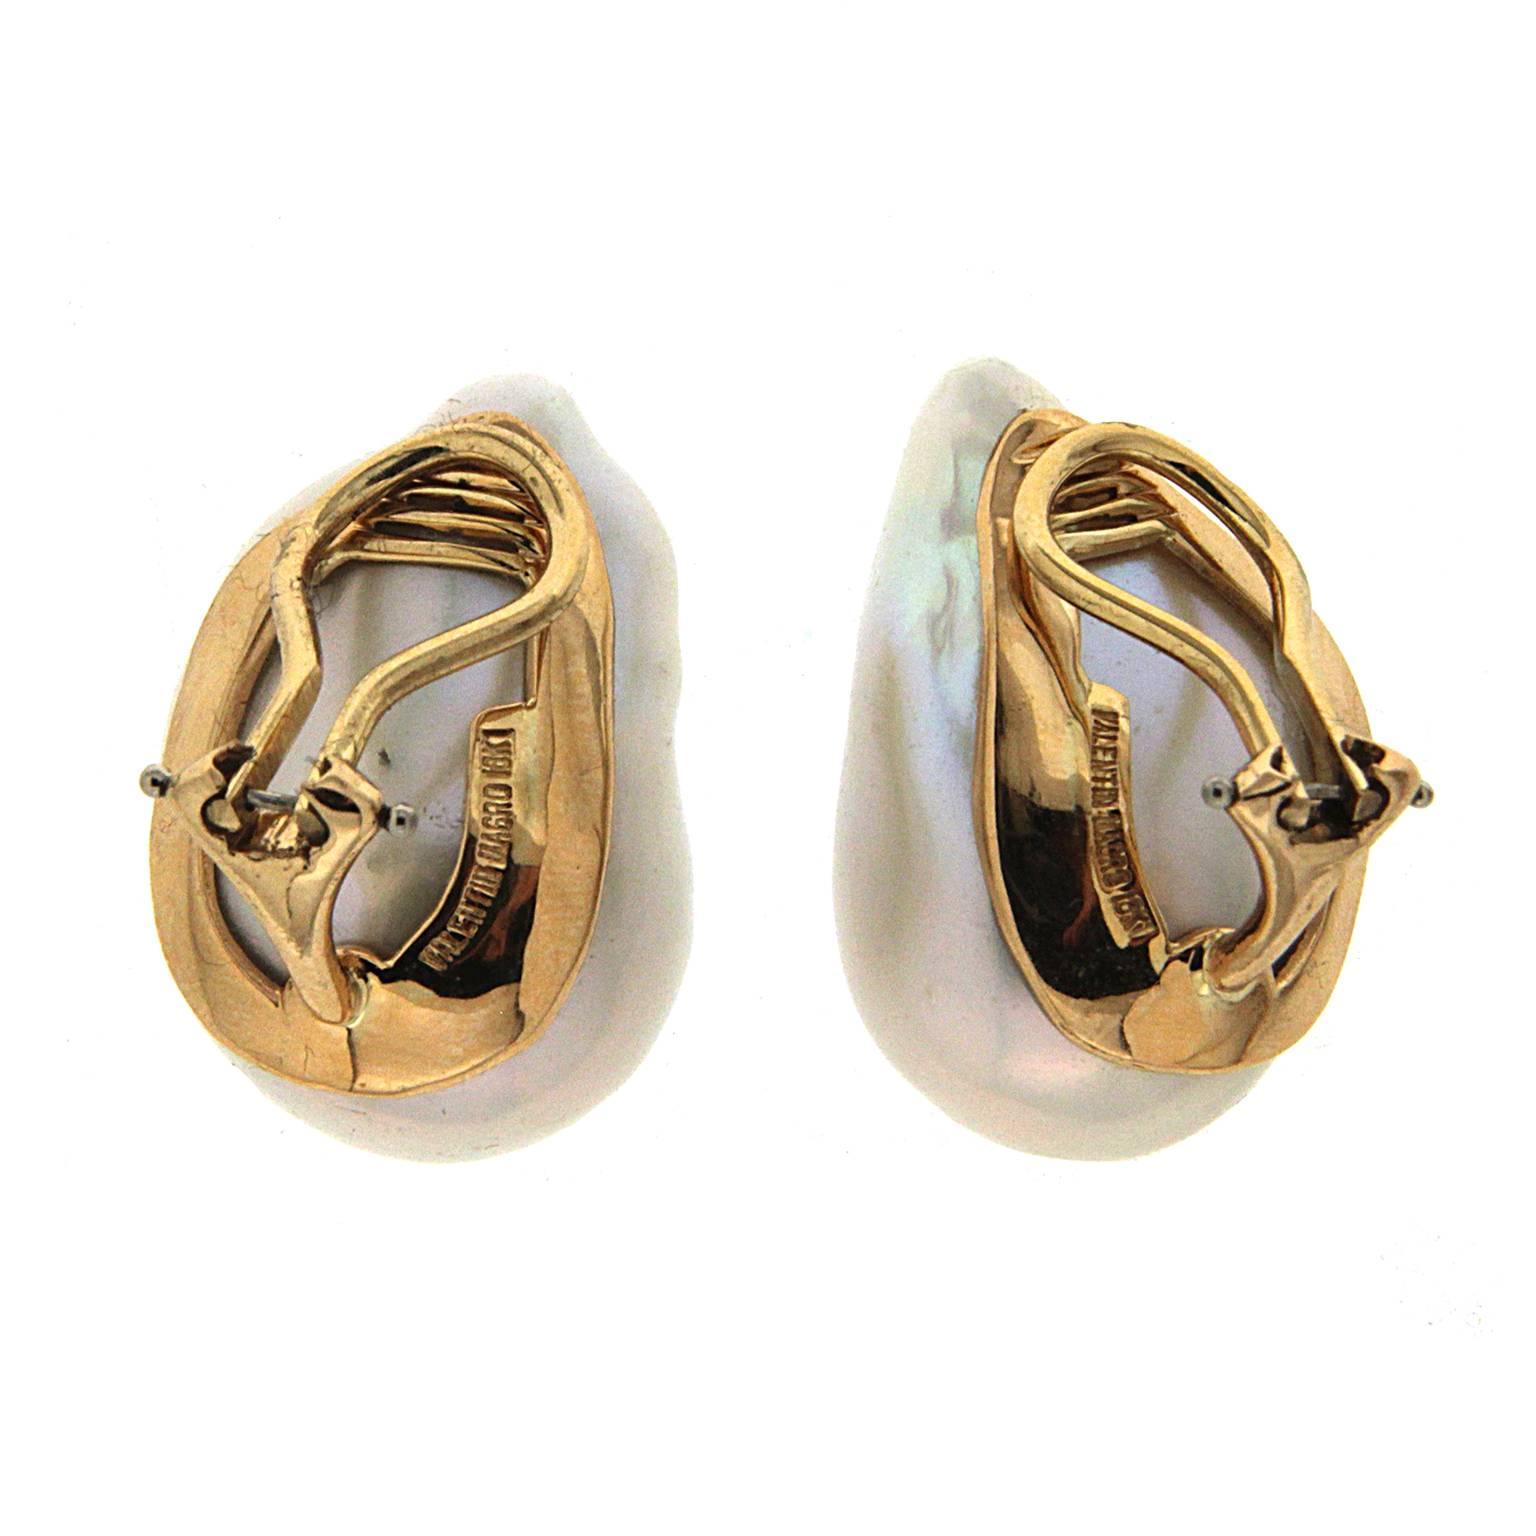 Baroque pearls are the centerpiece of these earrings from Valentin Magro. Their irregular shapes allow light to reflect from many angles, showing off their iridescence. The reverse of each earring is made of 18k yellow gold, including the